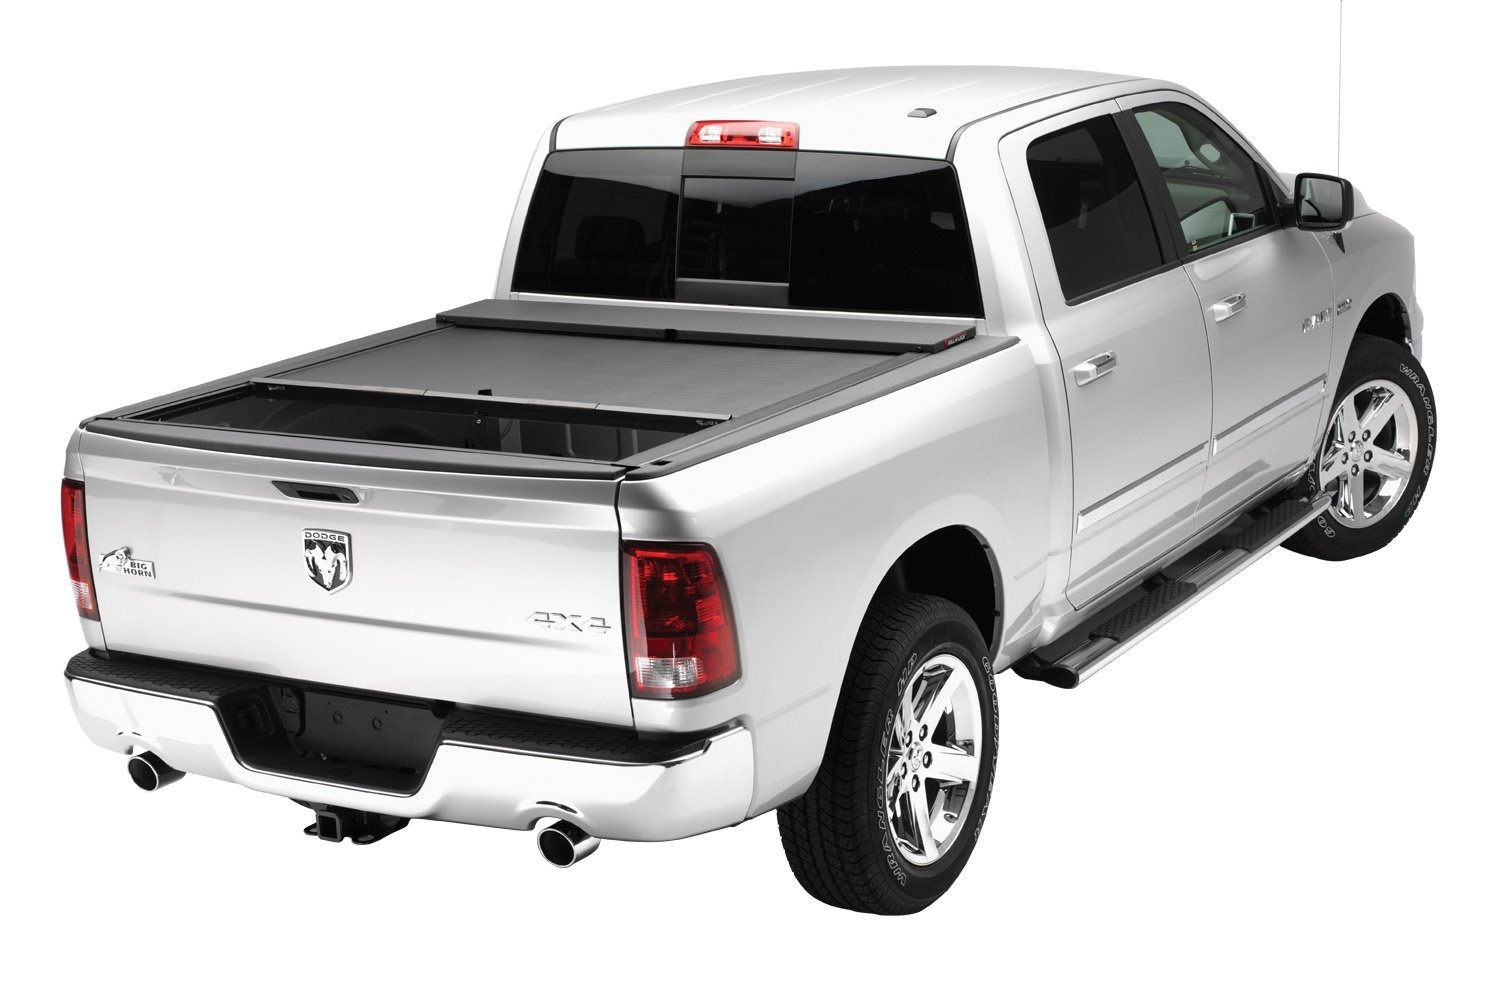 LG448M M-Series Locking Retractable Truck Bed Cover for Select Ram 1500/2500/3500, 2009-2018 Dodge Ram 1500 [6.4 ft. Bed]